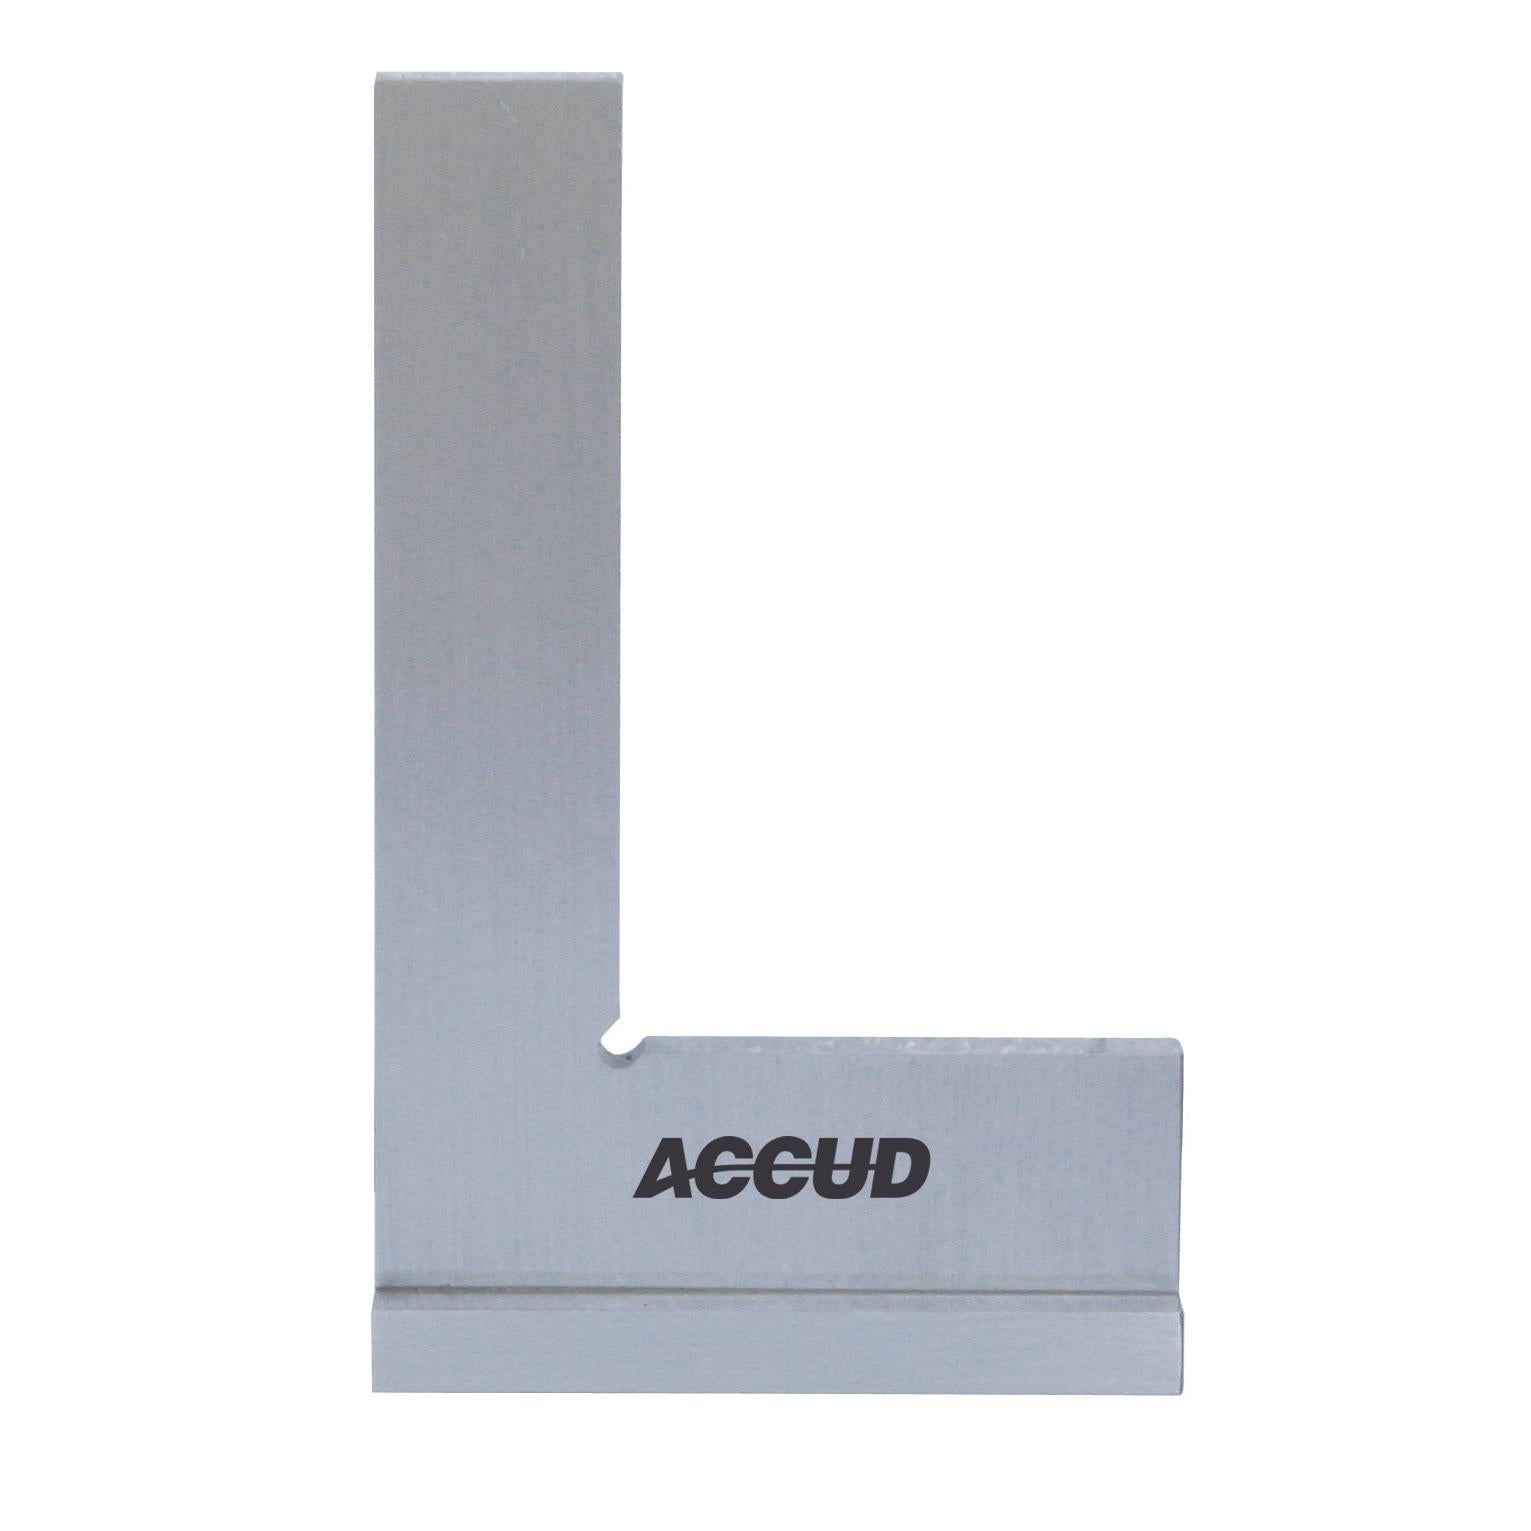 ACCUD | Flat Edge Square 75X50Mm | 842-003-10 Power Tool Services